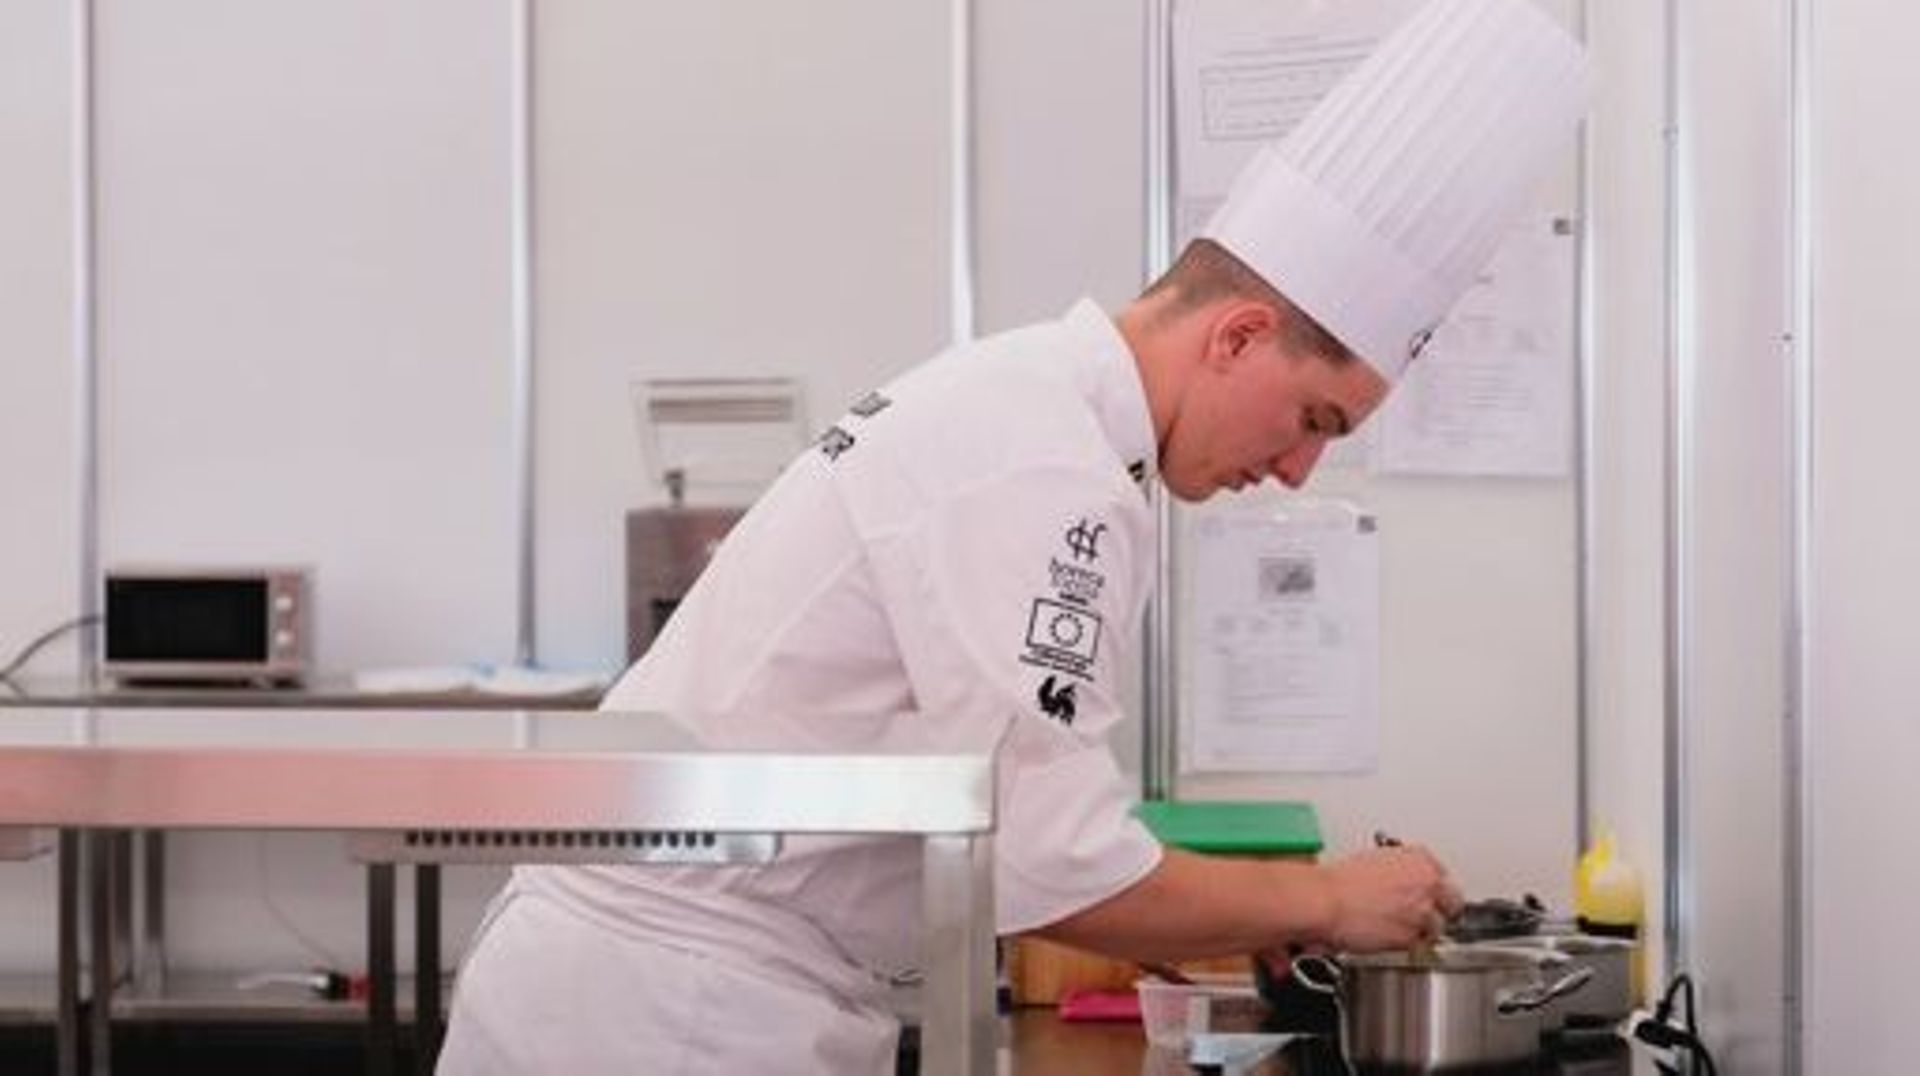 Bastien Massin, cooking, pictured during the Euroskills 2023 competition in Gdansk, Poland, Friday 08 September 2023. EuroSkills is a vocational skills competition which is staged as a European championship every two years. Around 400 active participants